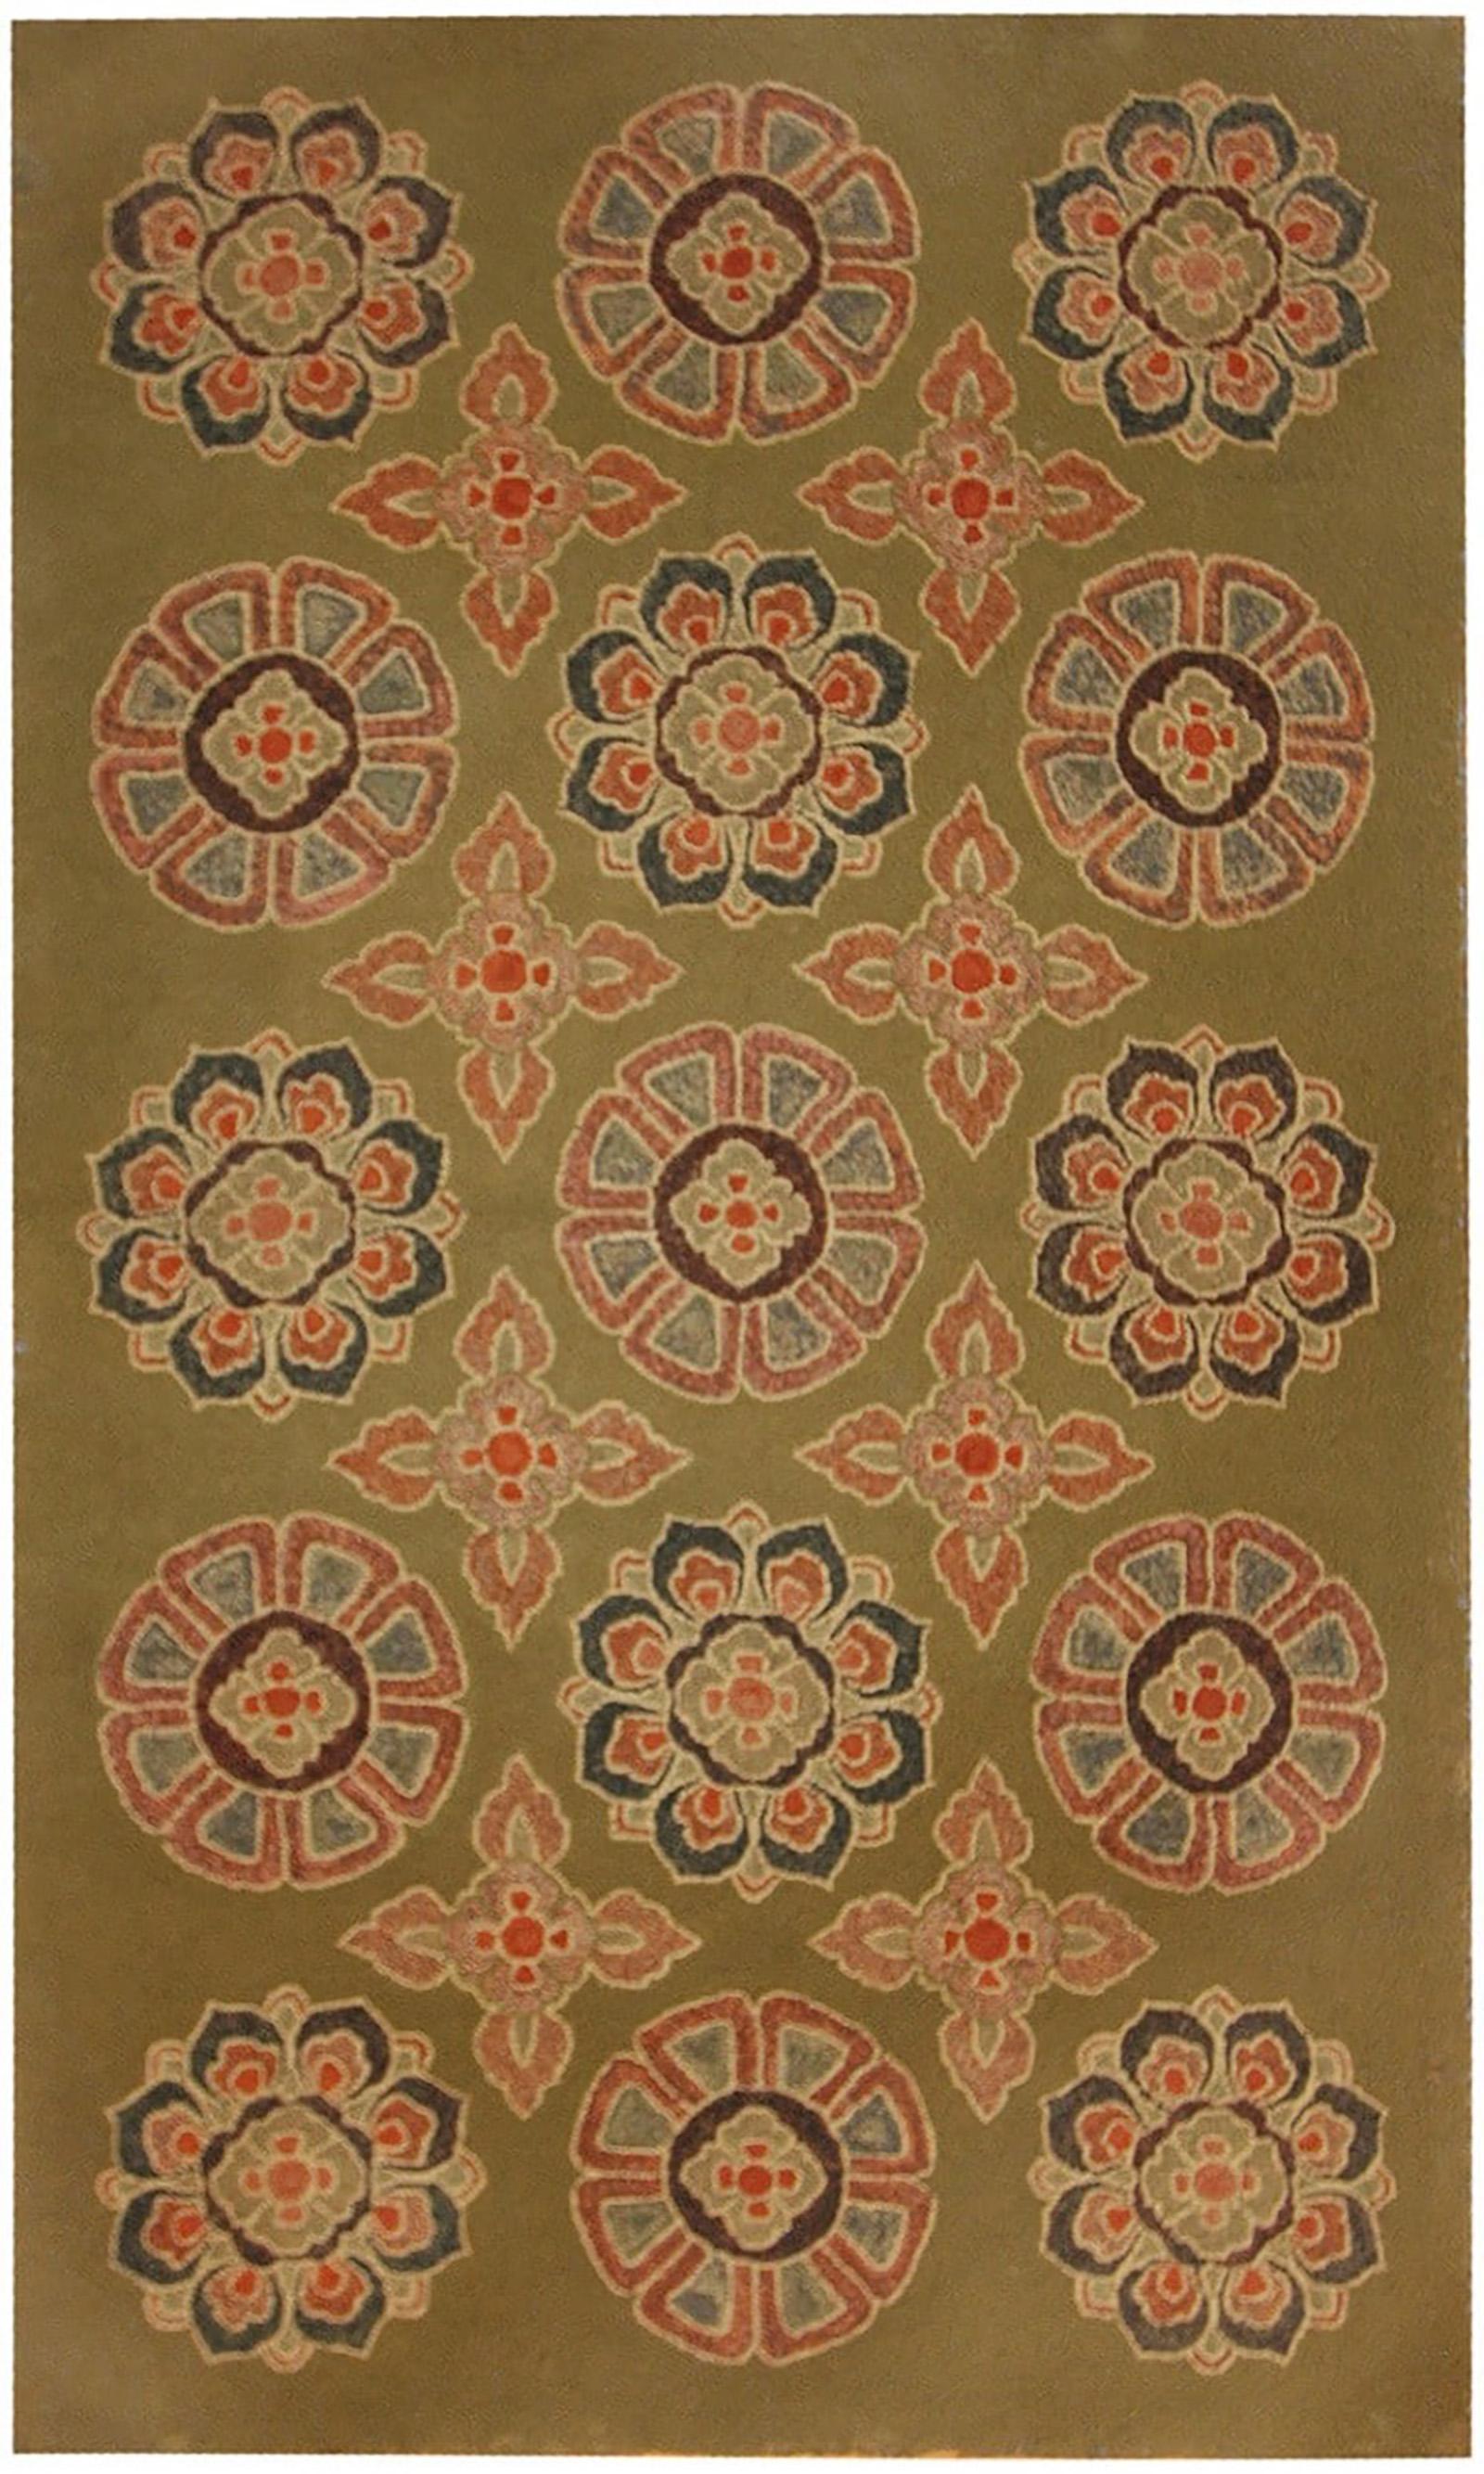 Beautiful Hooked Rug, America, Early 20th Century